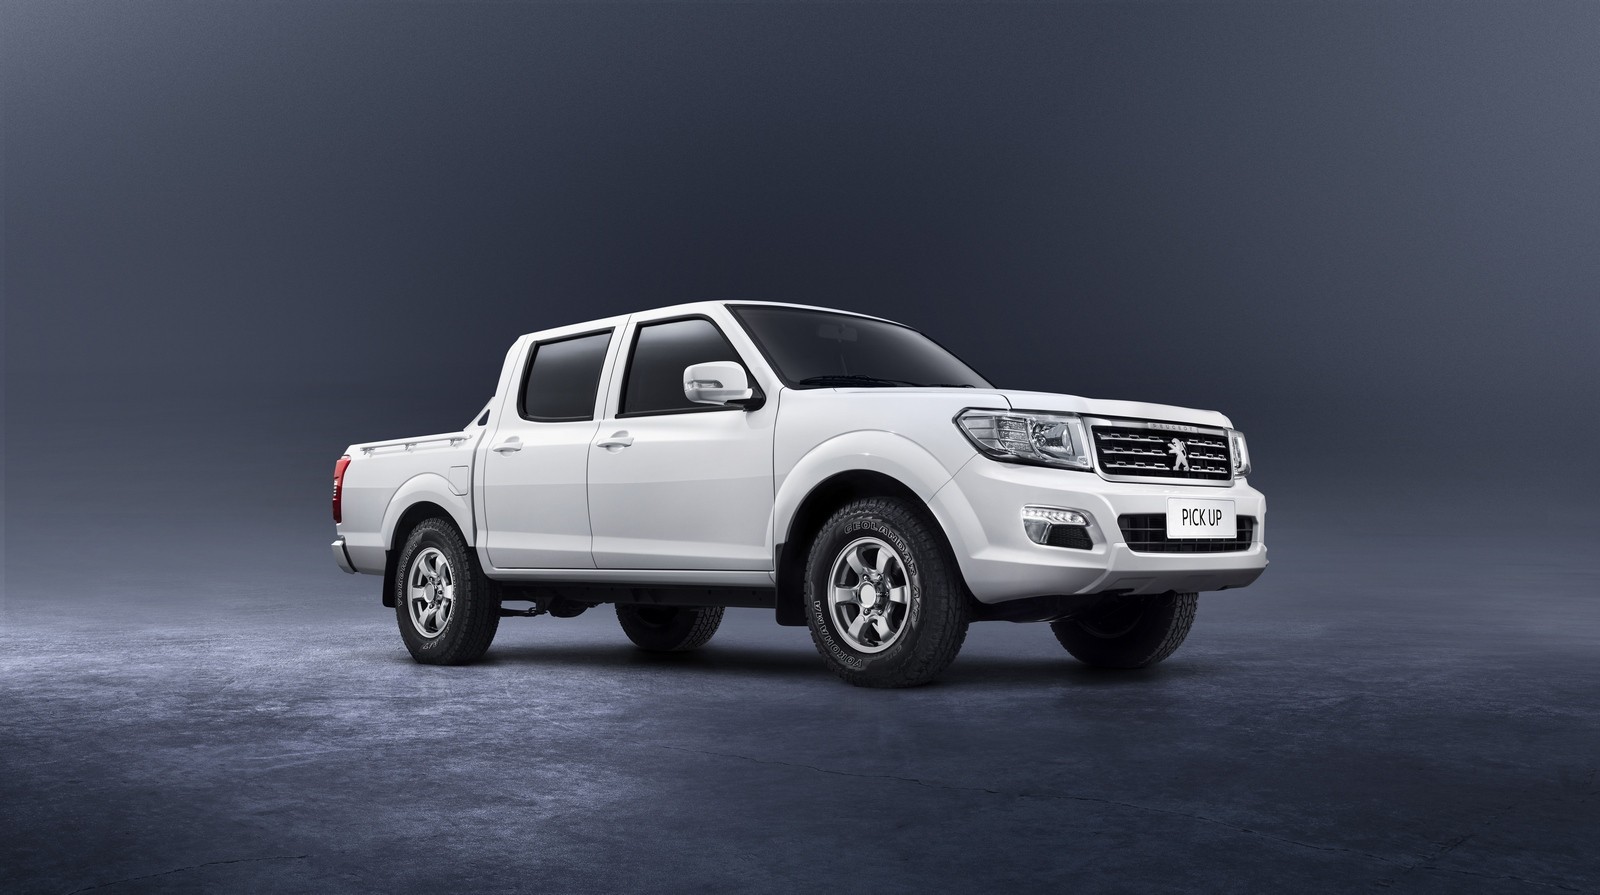 Yay! Peugeot has made a pick-up